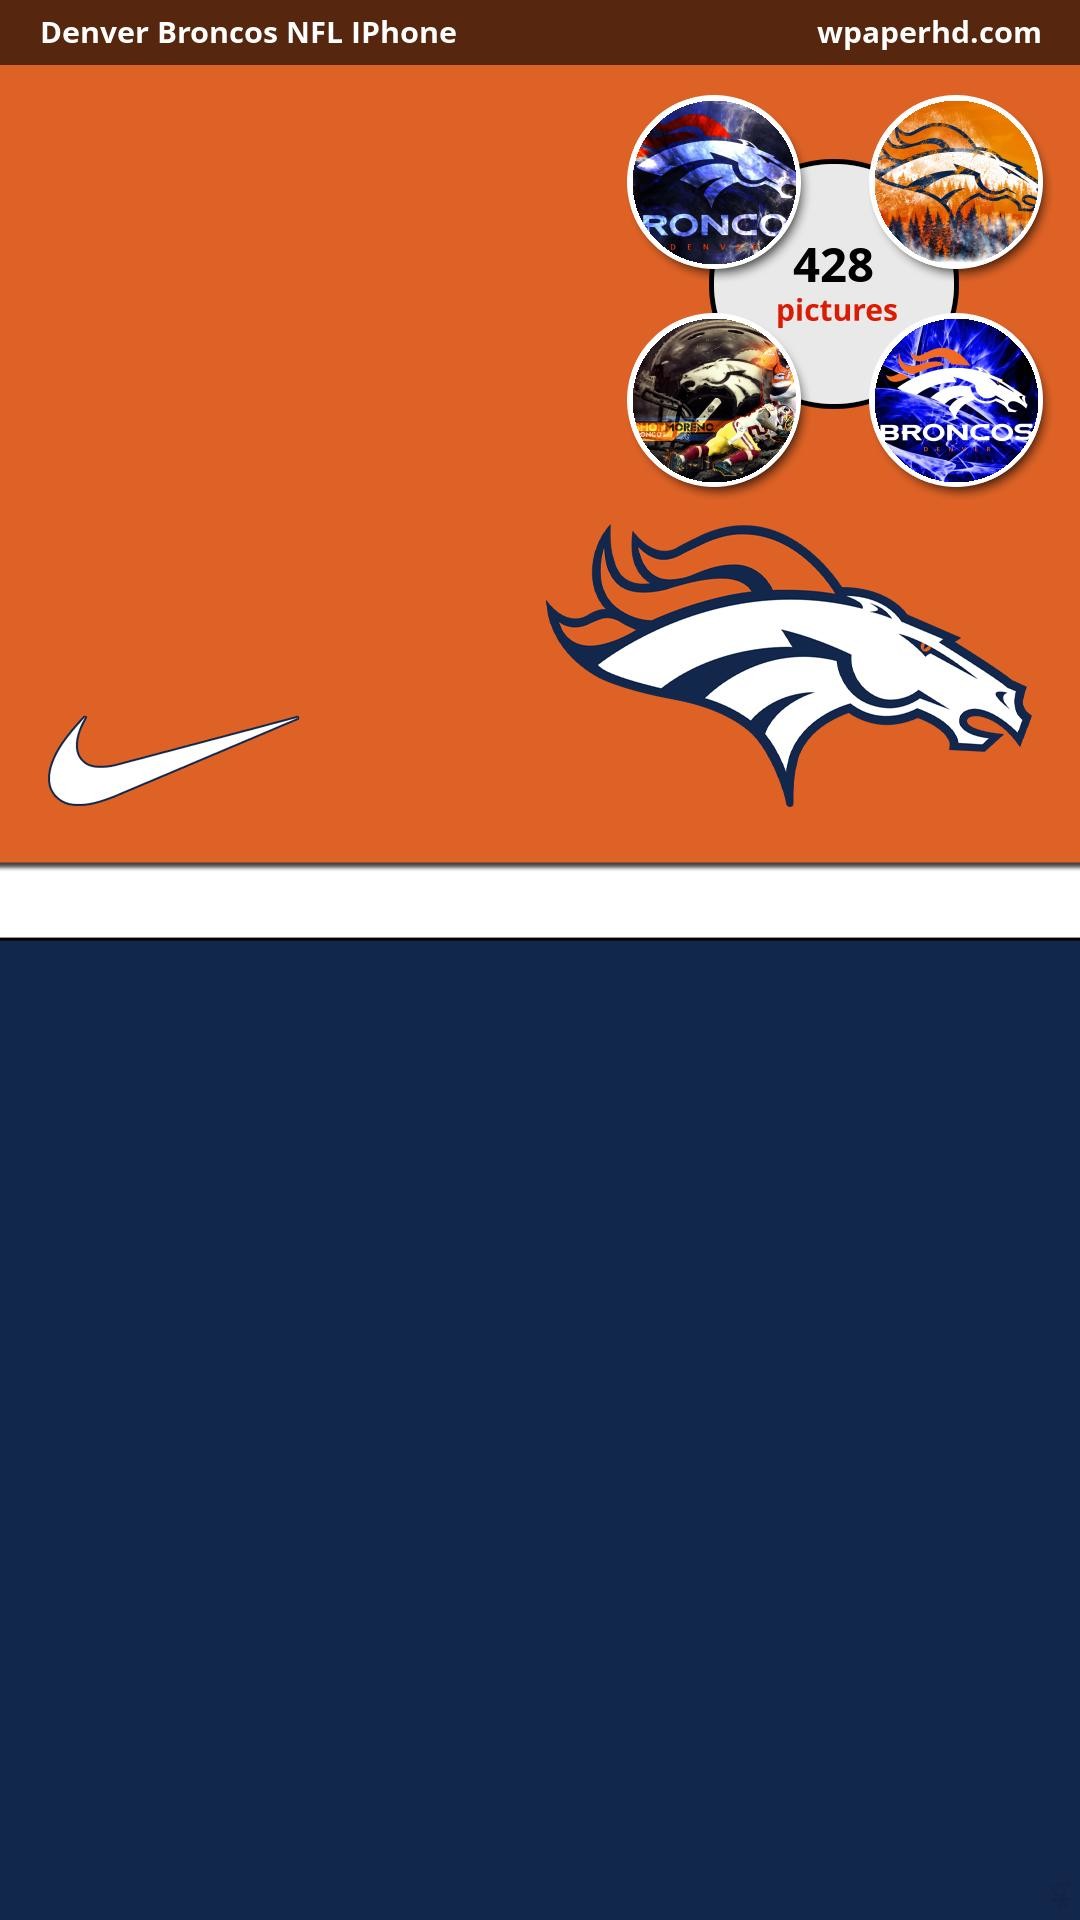 1080x1920 Description Denver Broncos NFL IPhone wallpaper from Football category. You  are on page with Denver Broncos NFL IPhone wallpaper ...